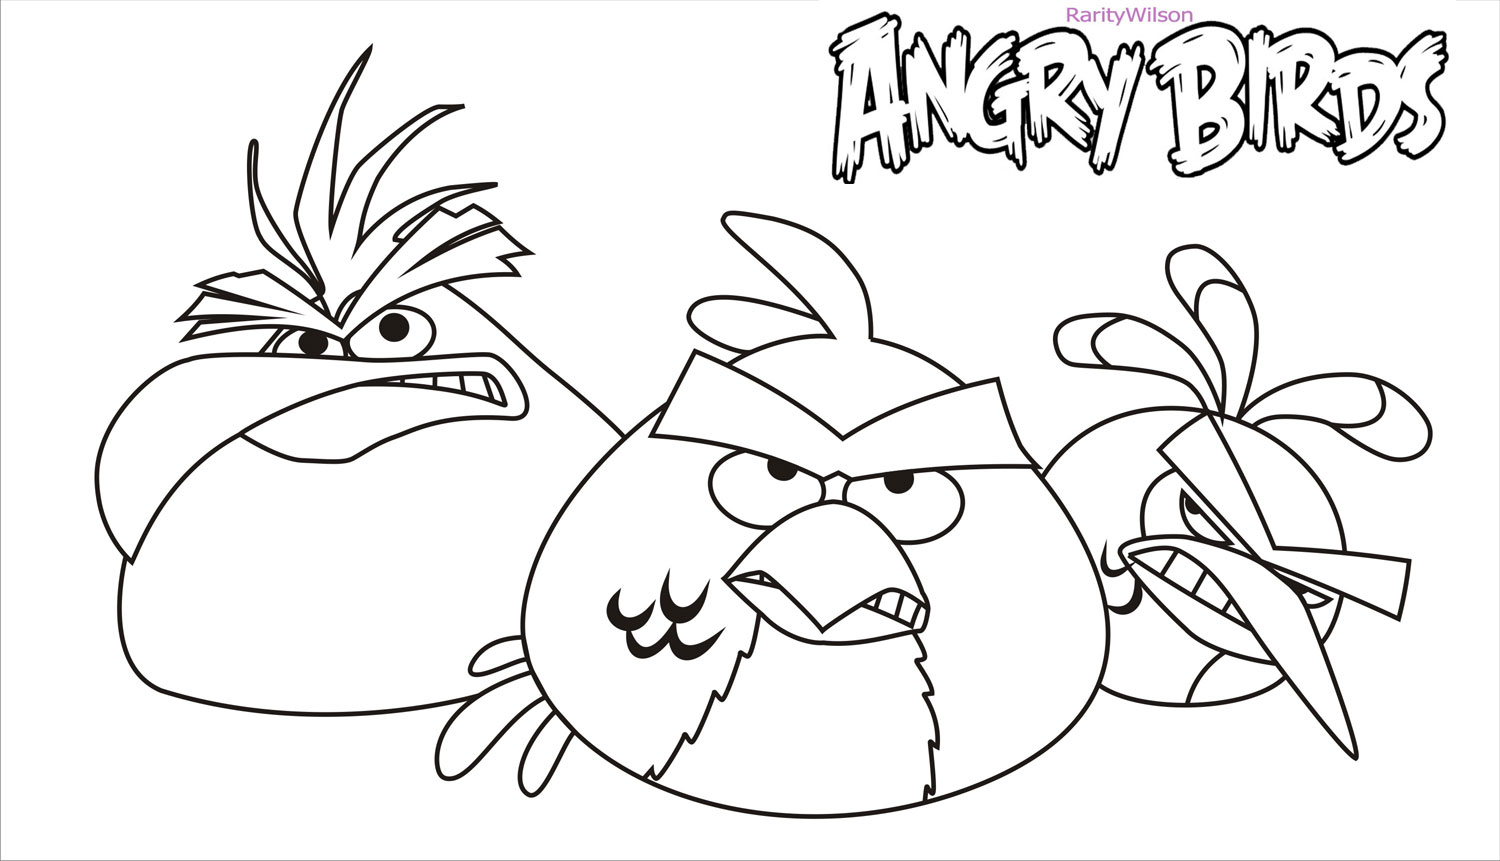 'Discover the World of Angry Birds in Black and White!'